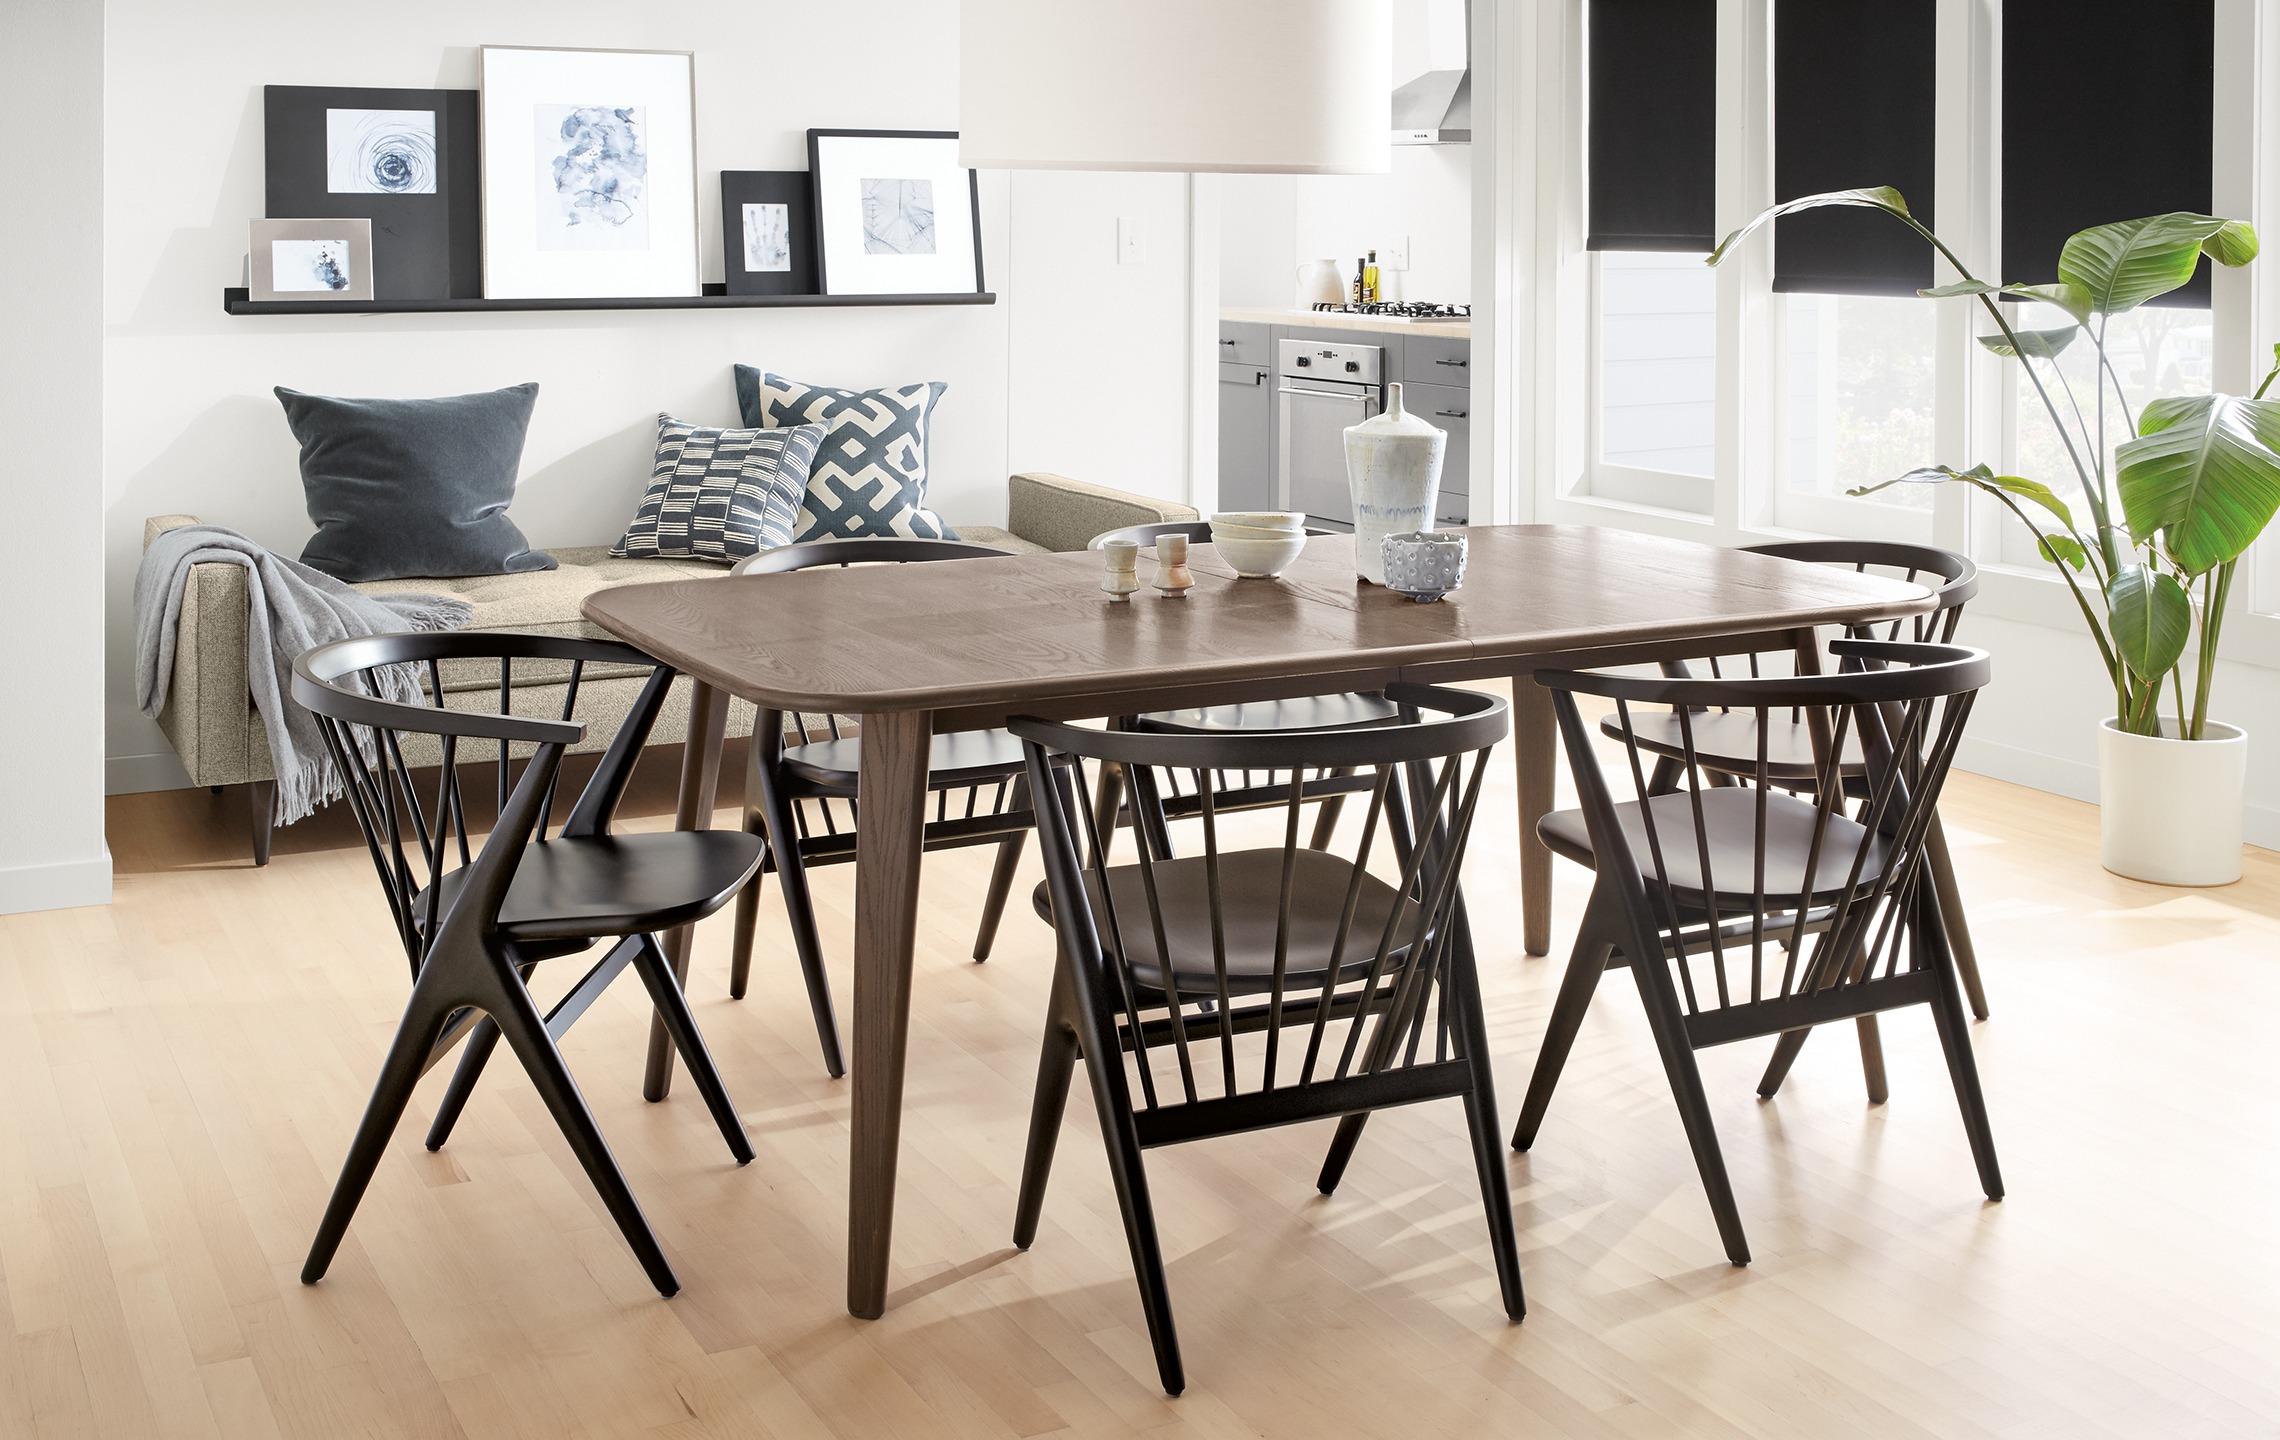 Lowell extension dining table with Soren chairs